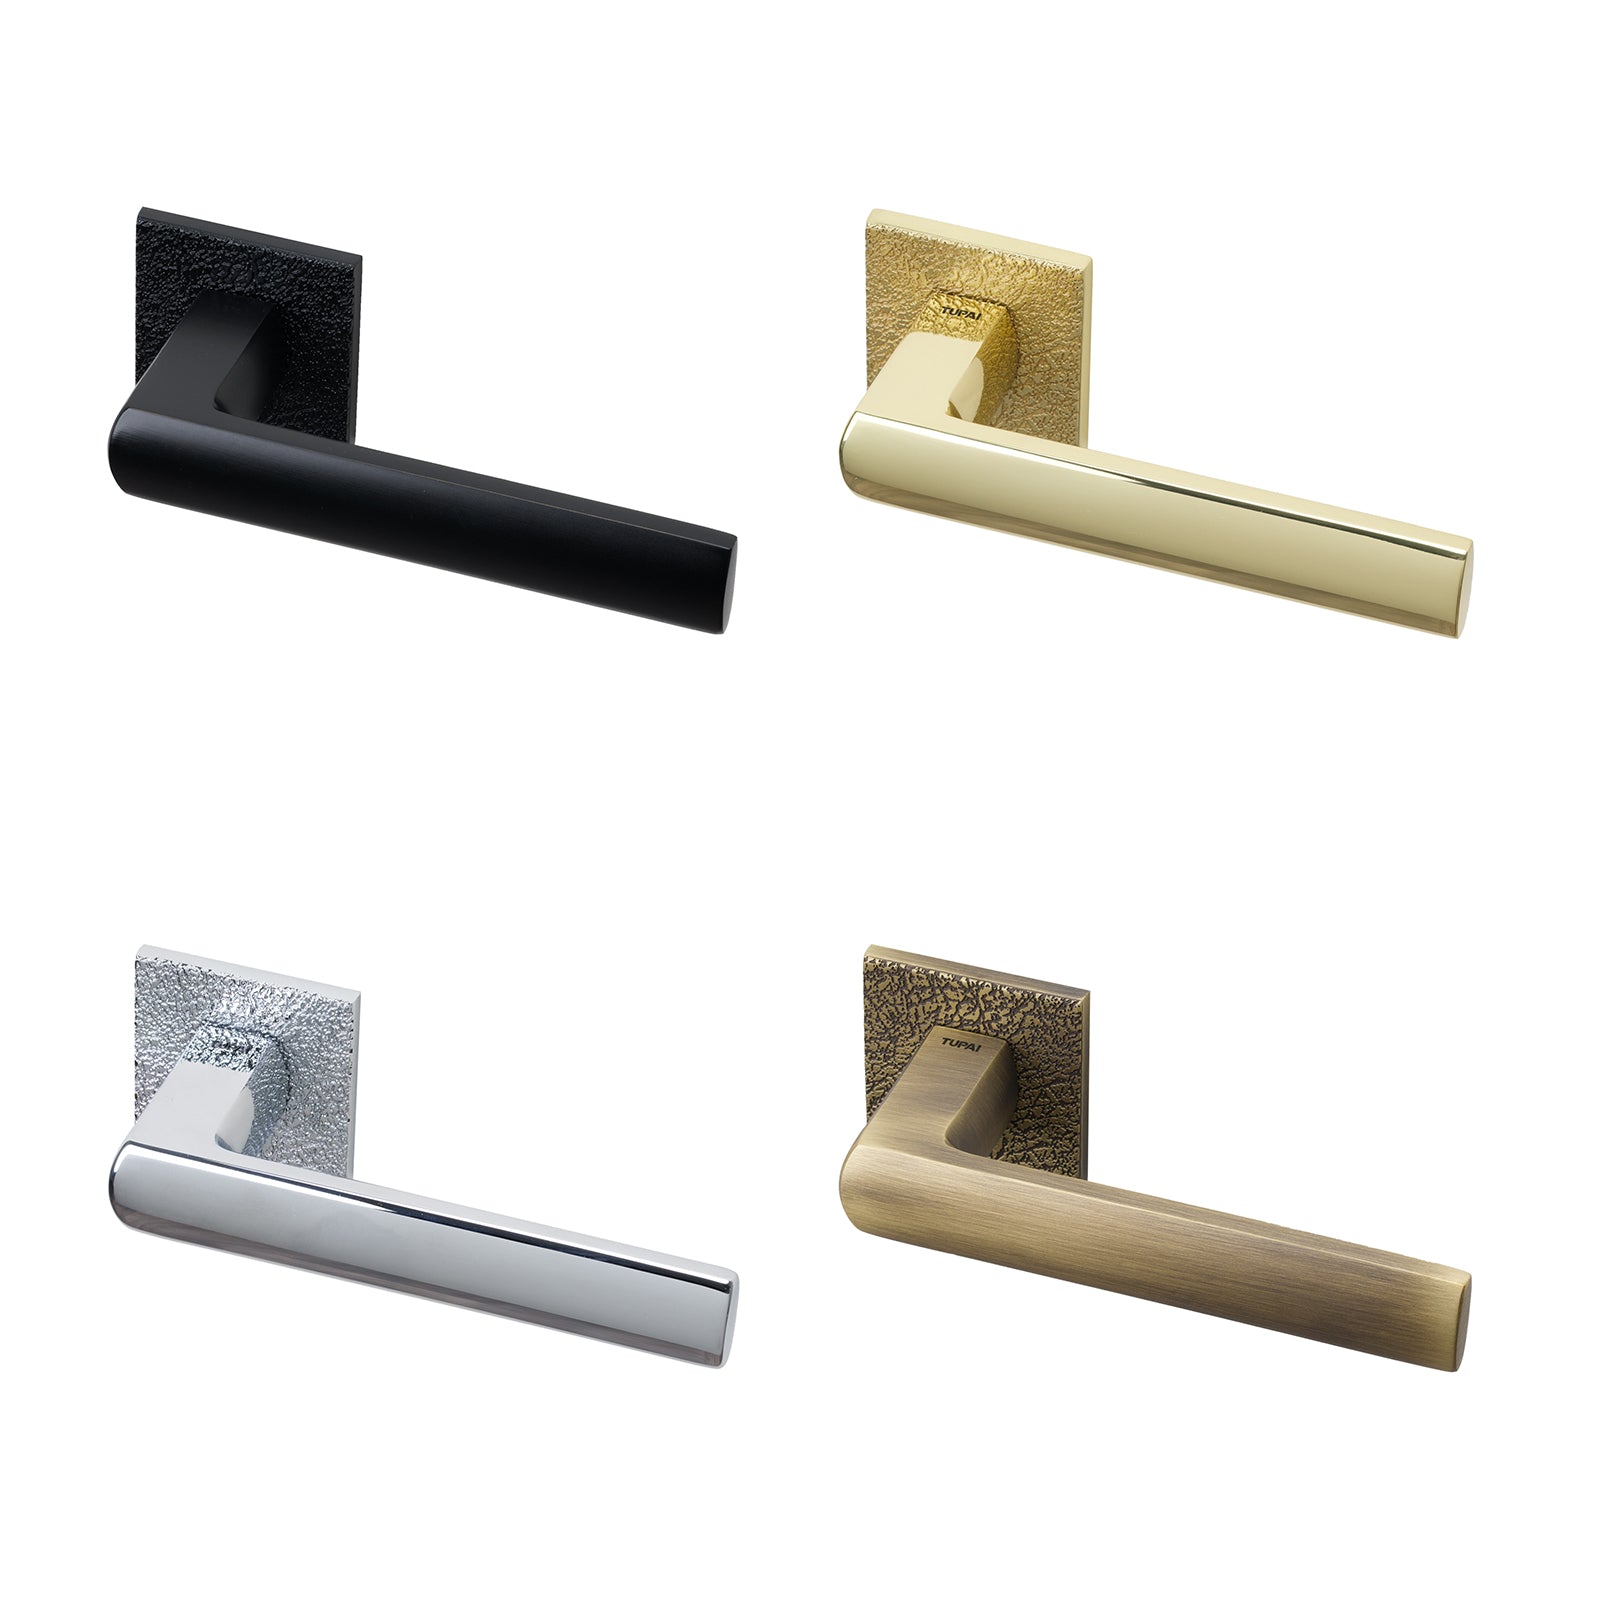 Tupai texture Coroto lever on rose door handles in leather finish with 6mm thick rose